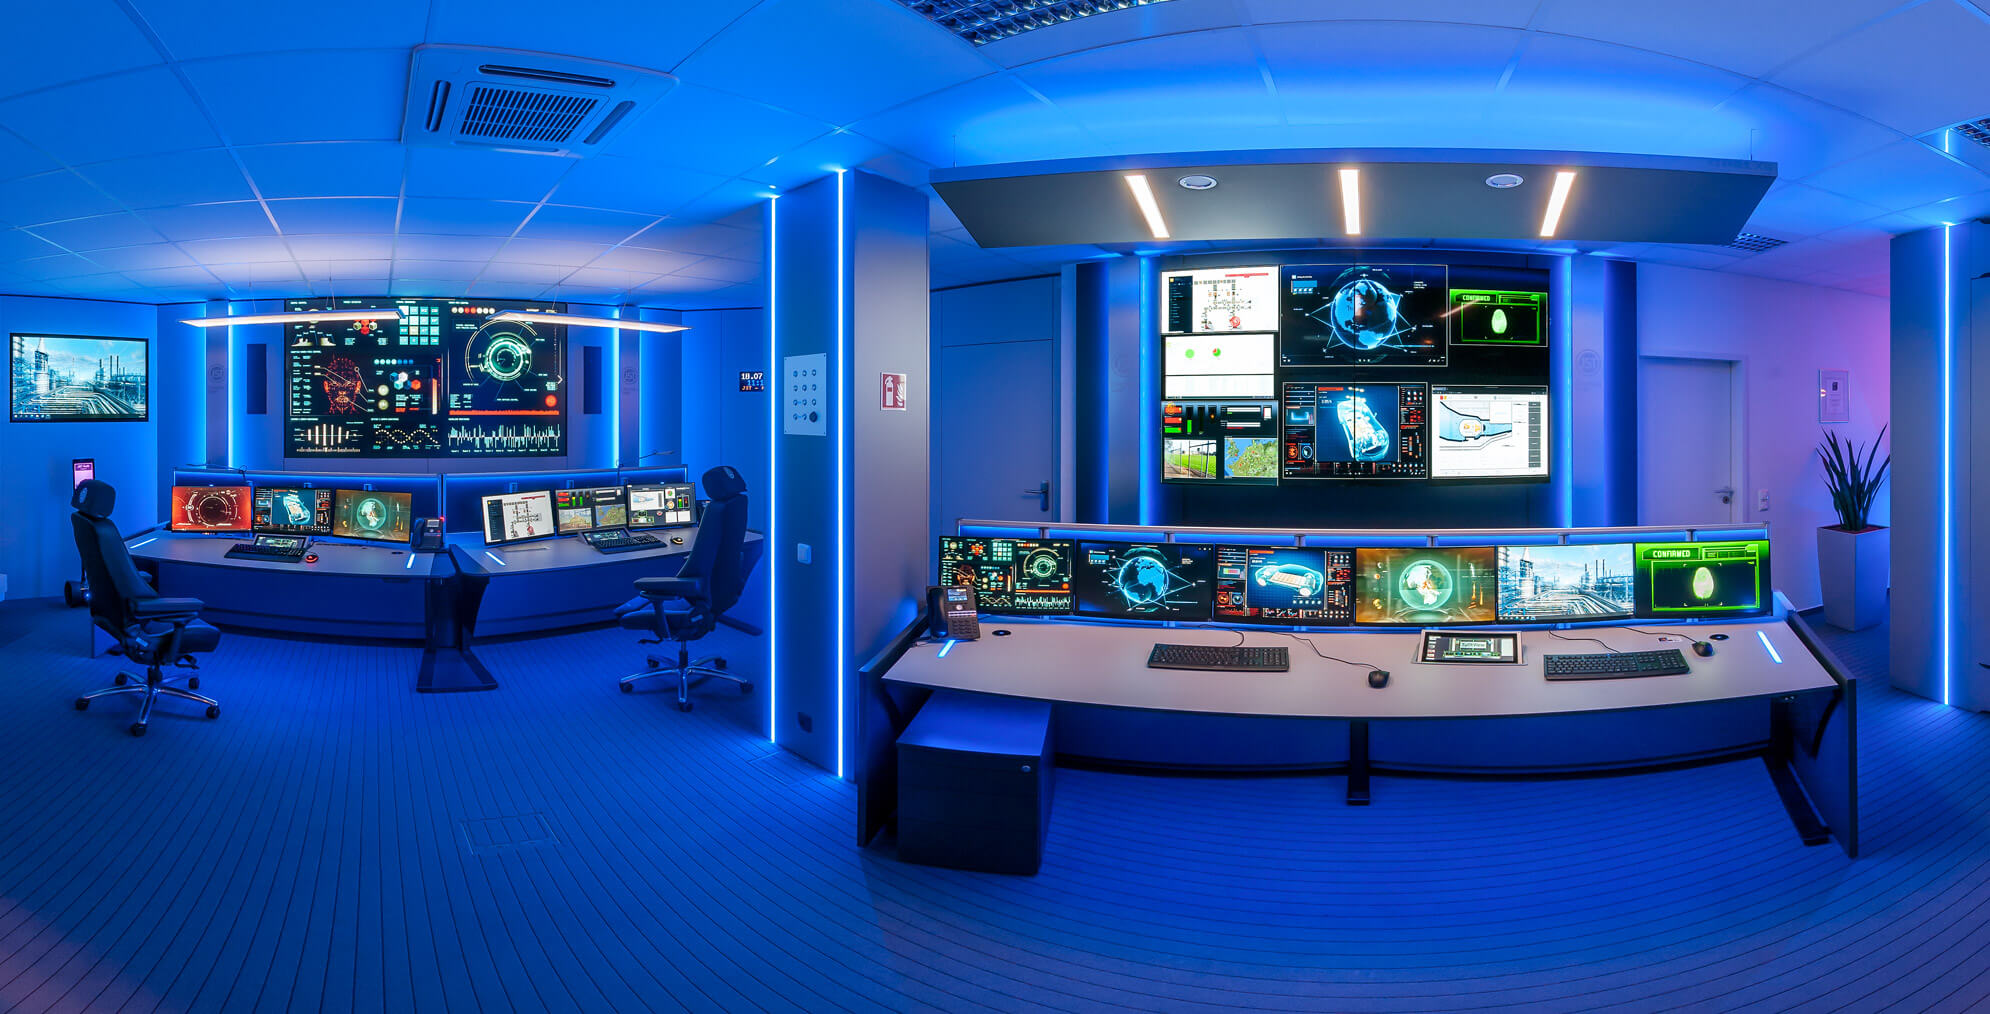 Virtual 360° tour of JST's control room simulator in Buxtehude